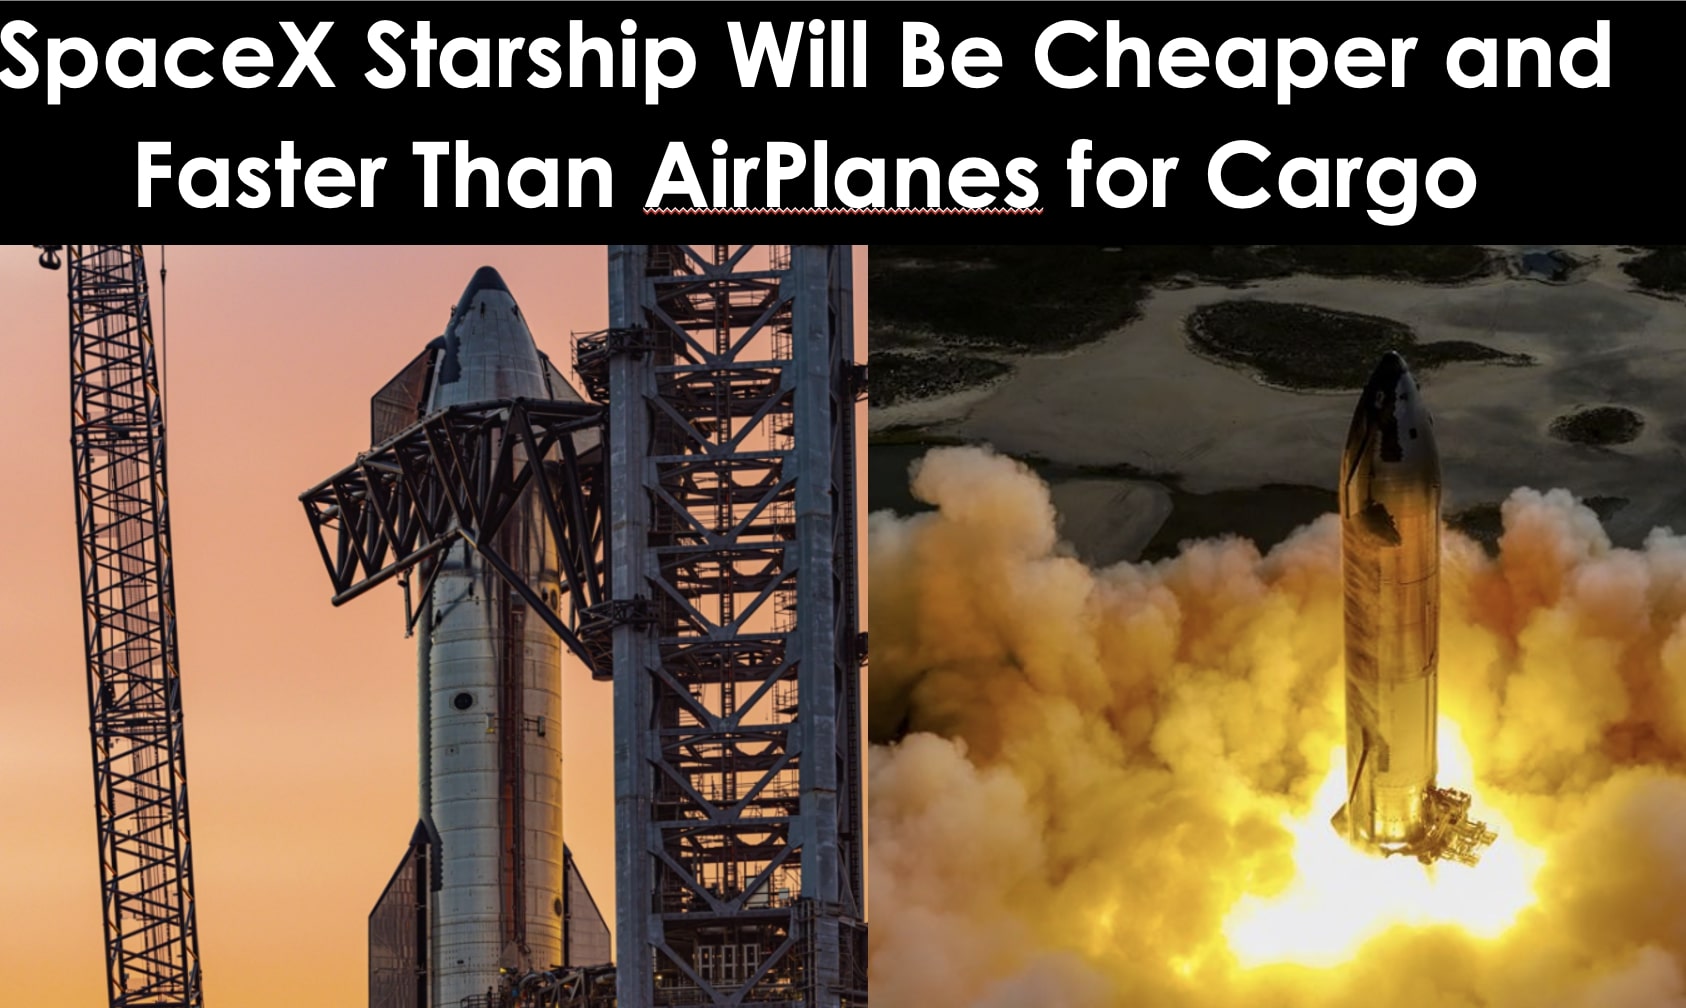 SpaceX Reusable Starship Could Become Cheaper than Intercontinental Airplanes for Earth Cargo